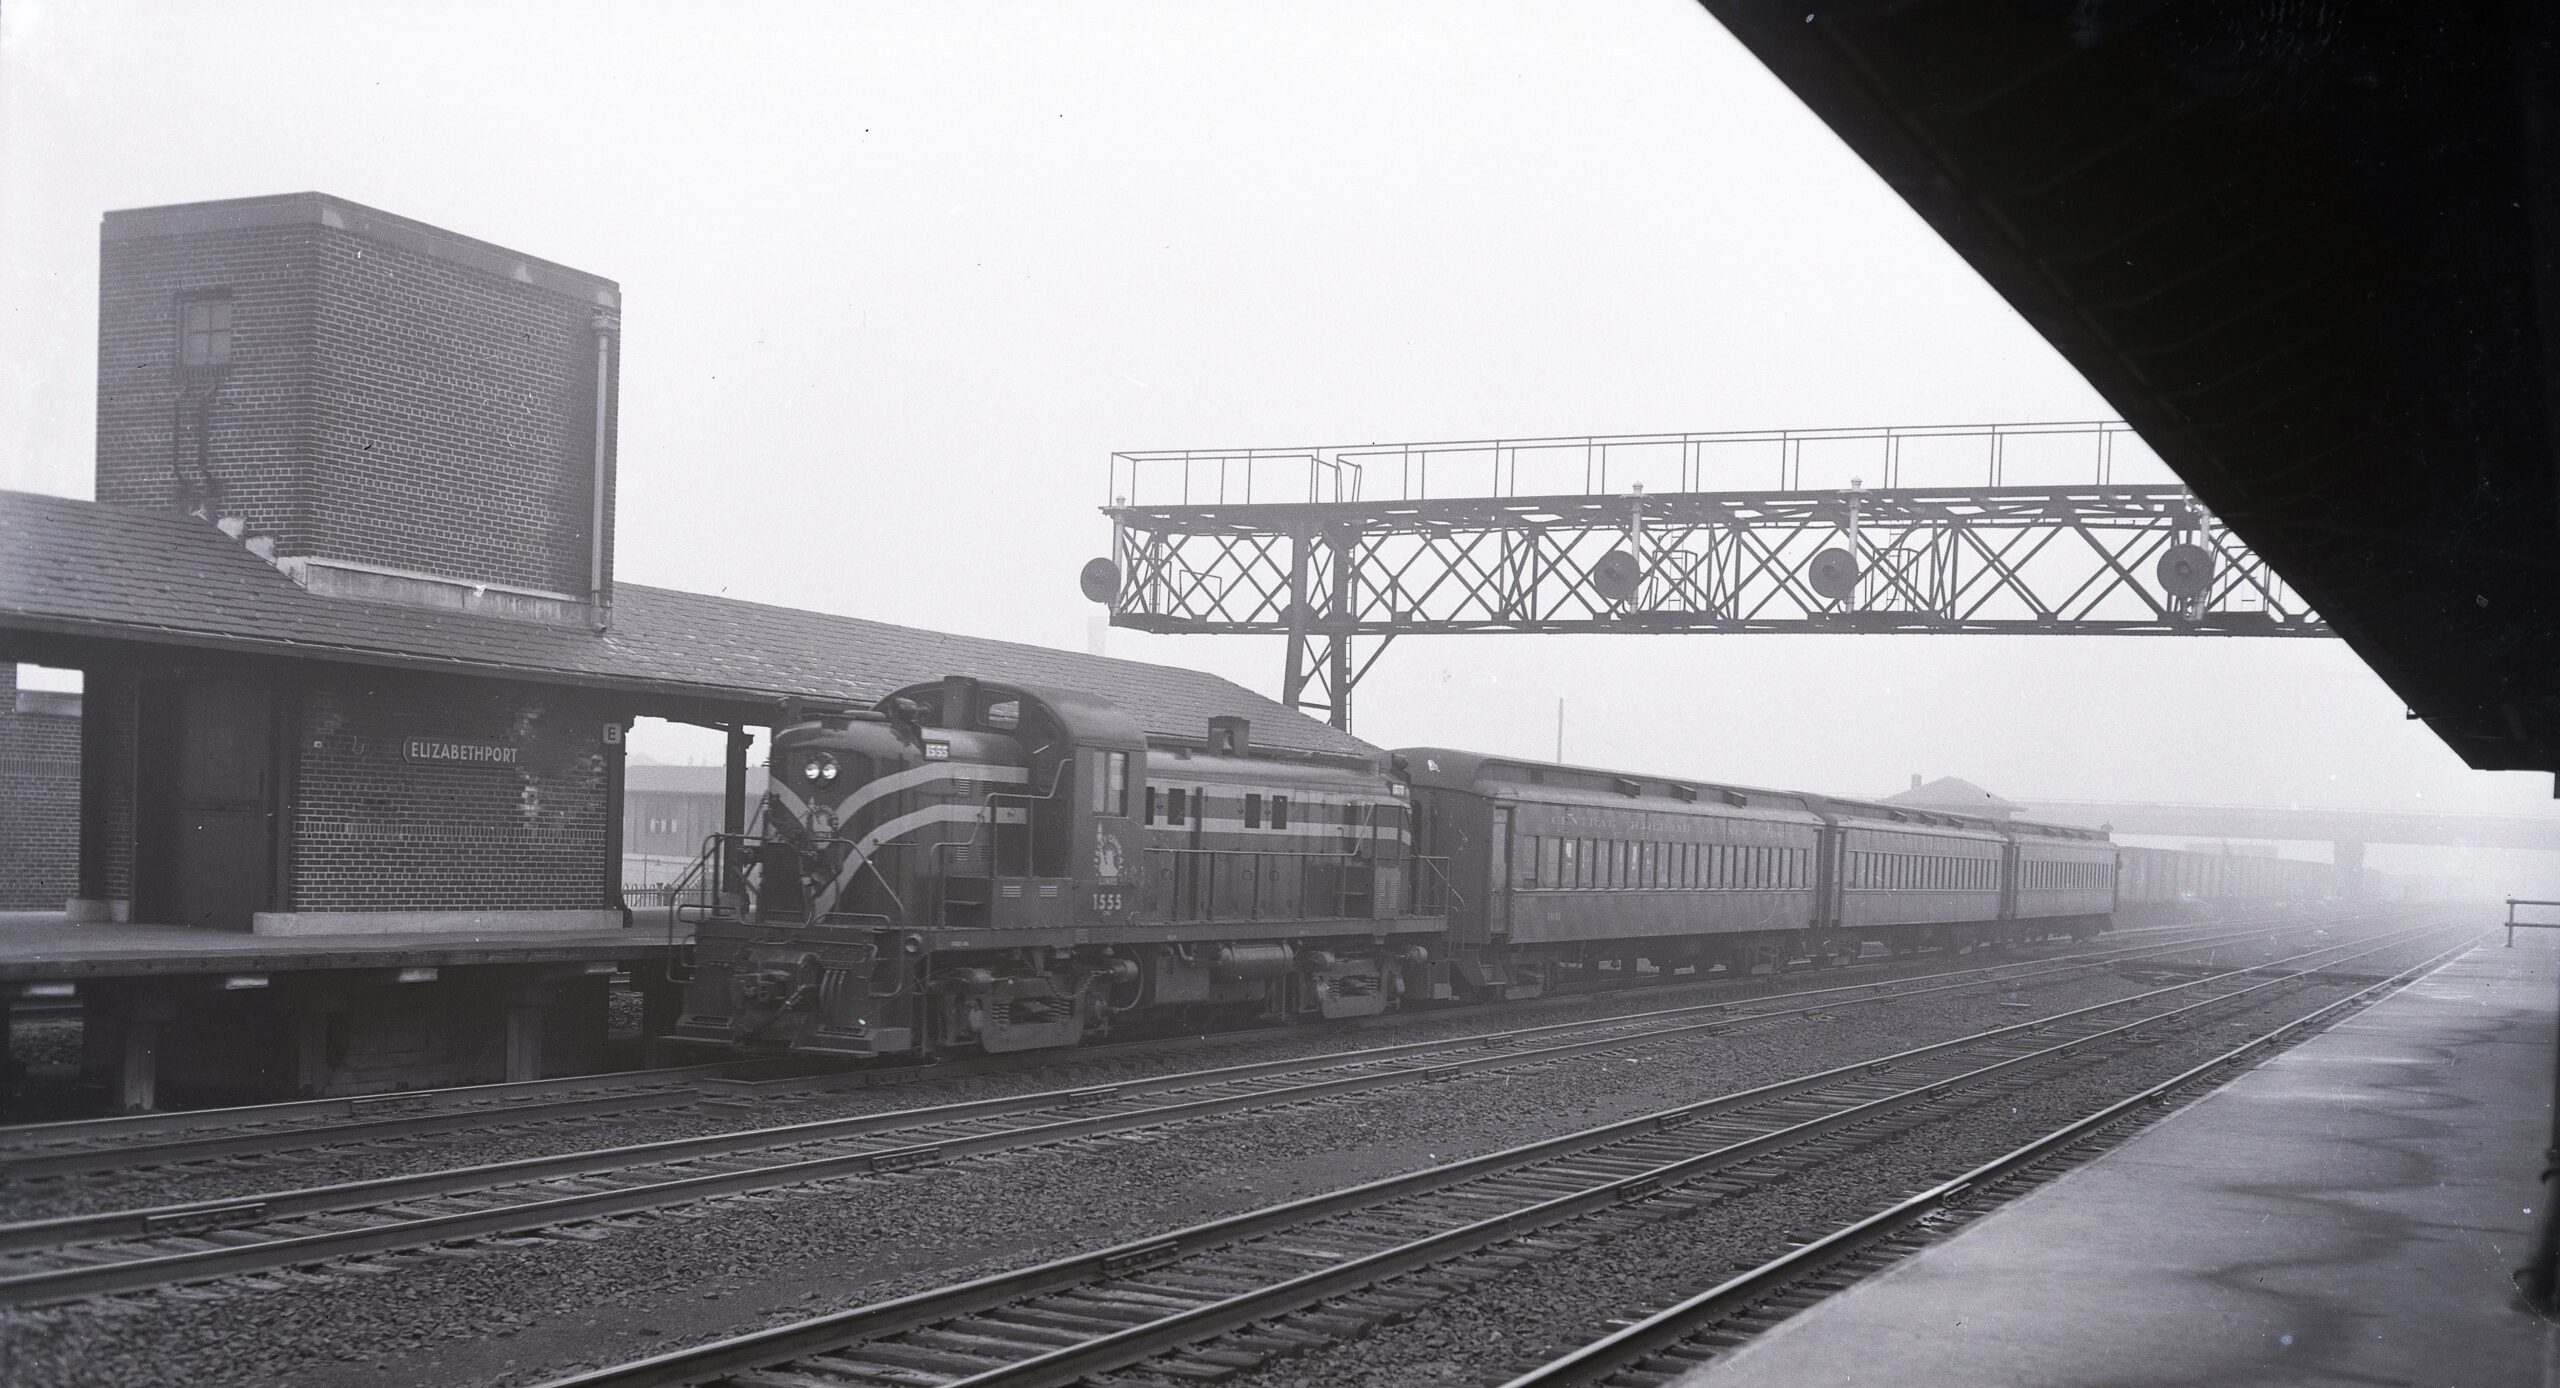 Central Railroad of New Jersey | Elizabethport, New Jersey | Alco class RS3 # 1555 | Local eastbound Commuter Train | Elizabethport Passenger Station | May 17, 1953 | Robert Long photograph | West Jersey Chapter Collection